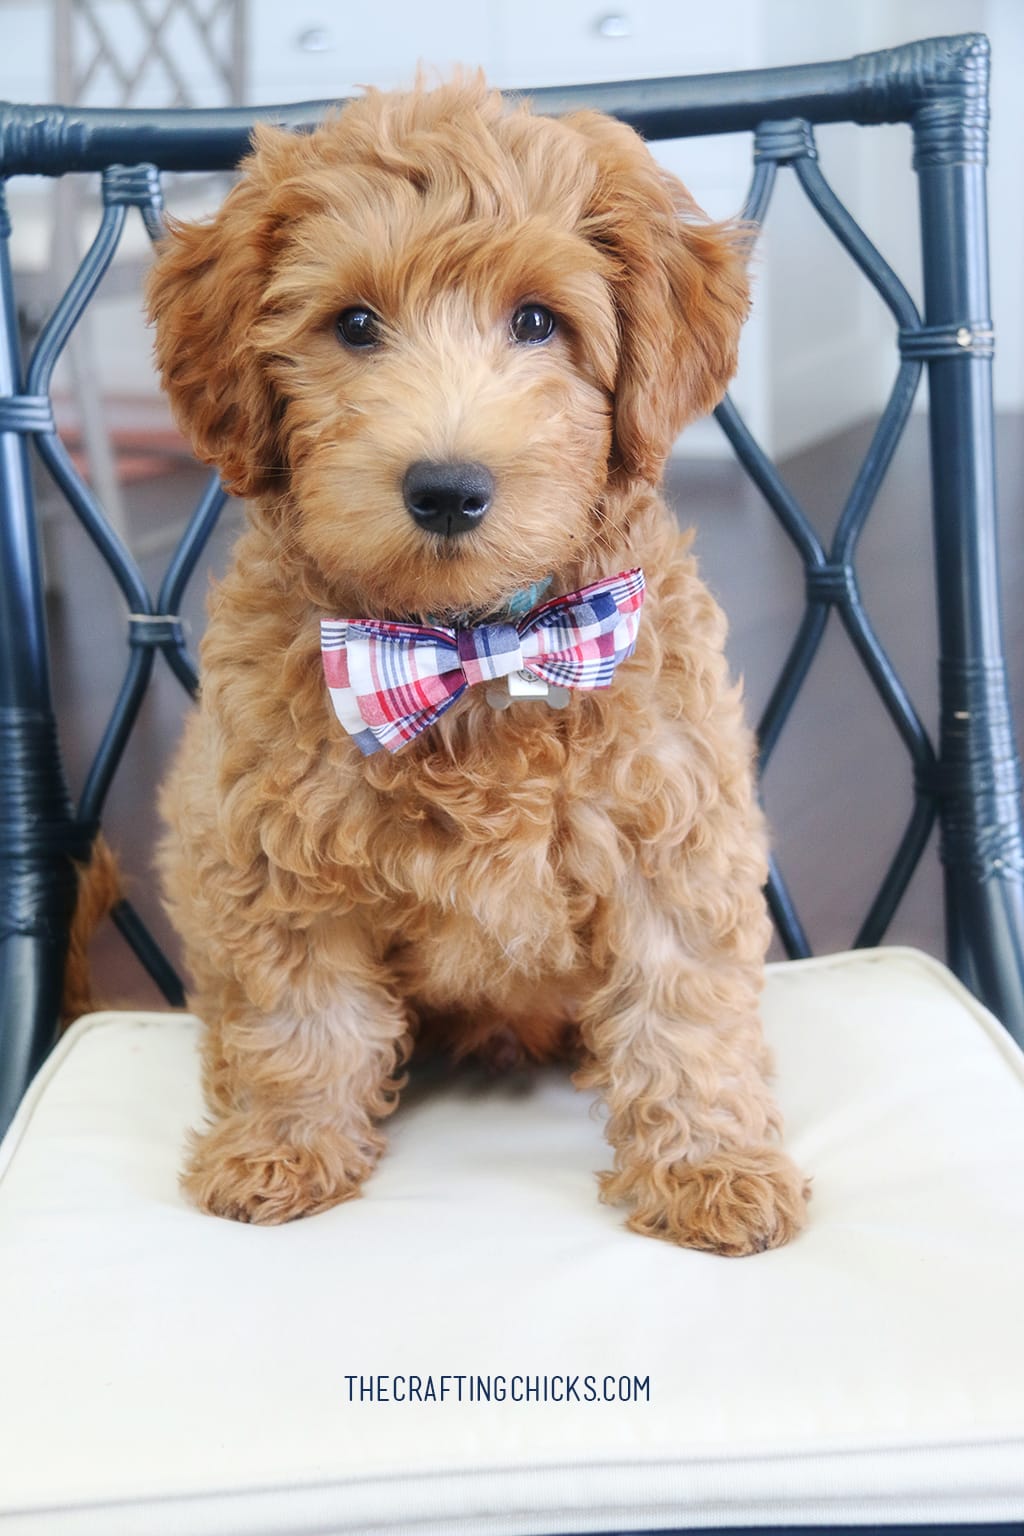 Goldendoodle puppy with plaid bow tie sitting on a kitchen chair.